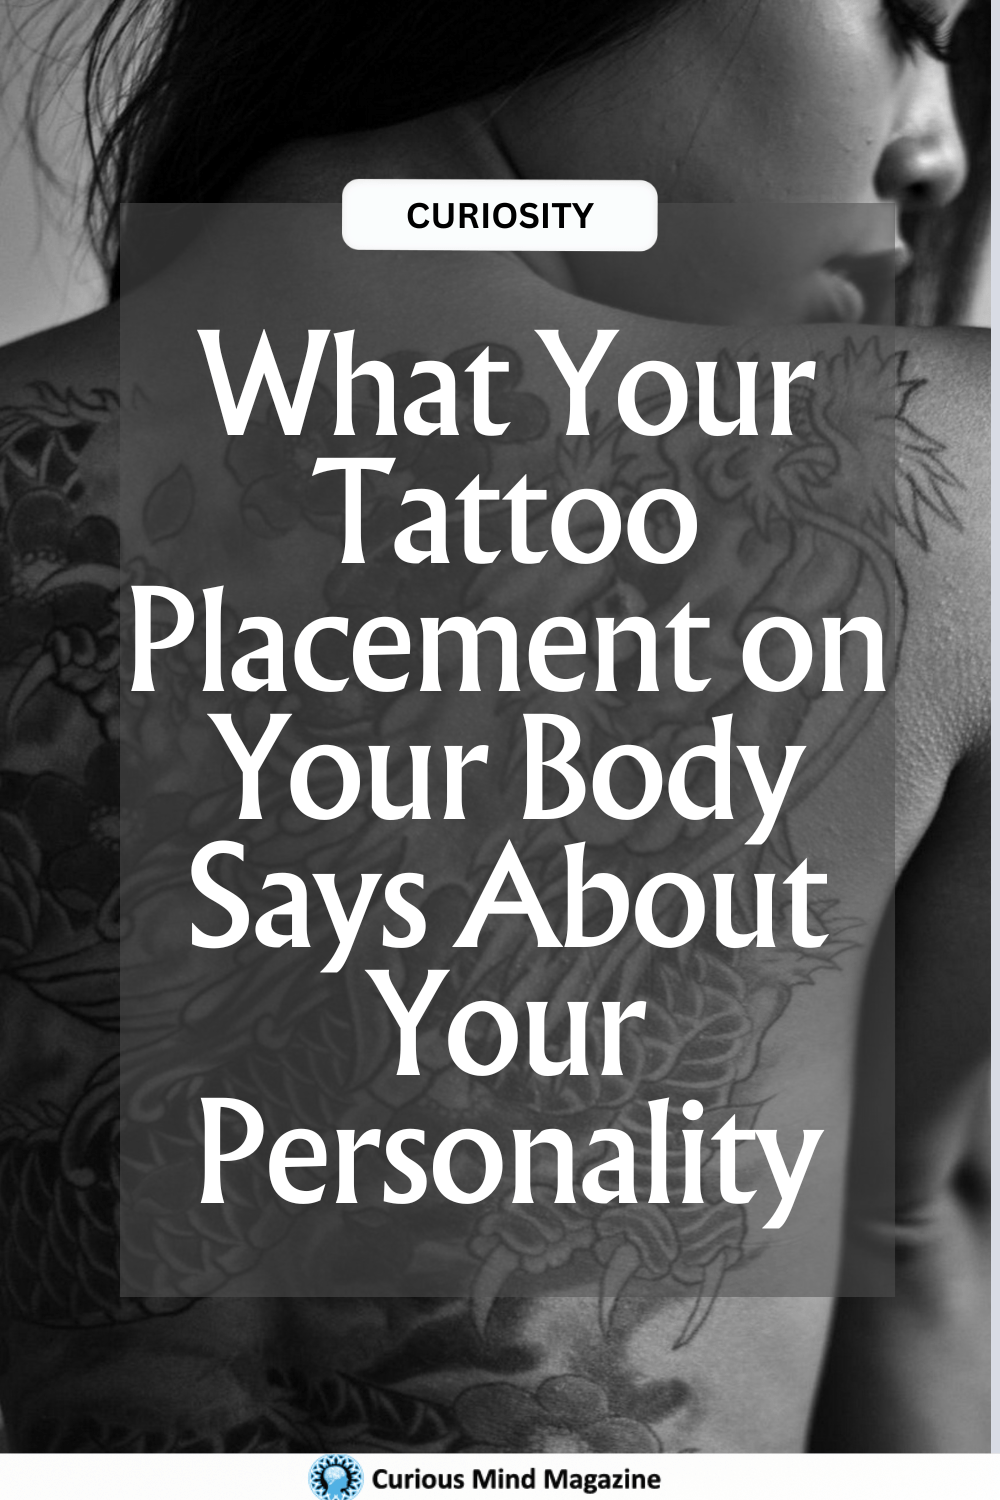 What Your Tattoo Placement on Your Body Says About Your Personality